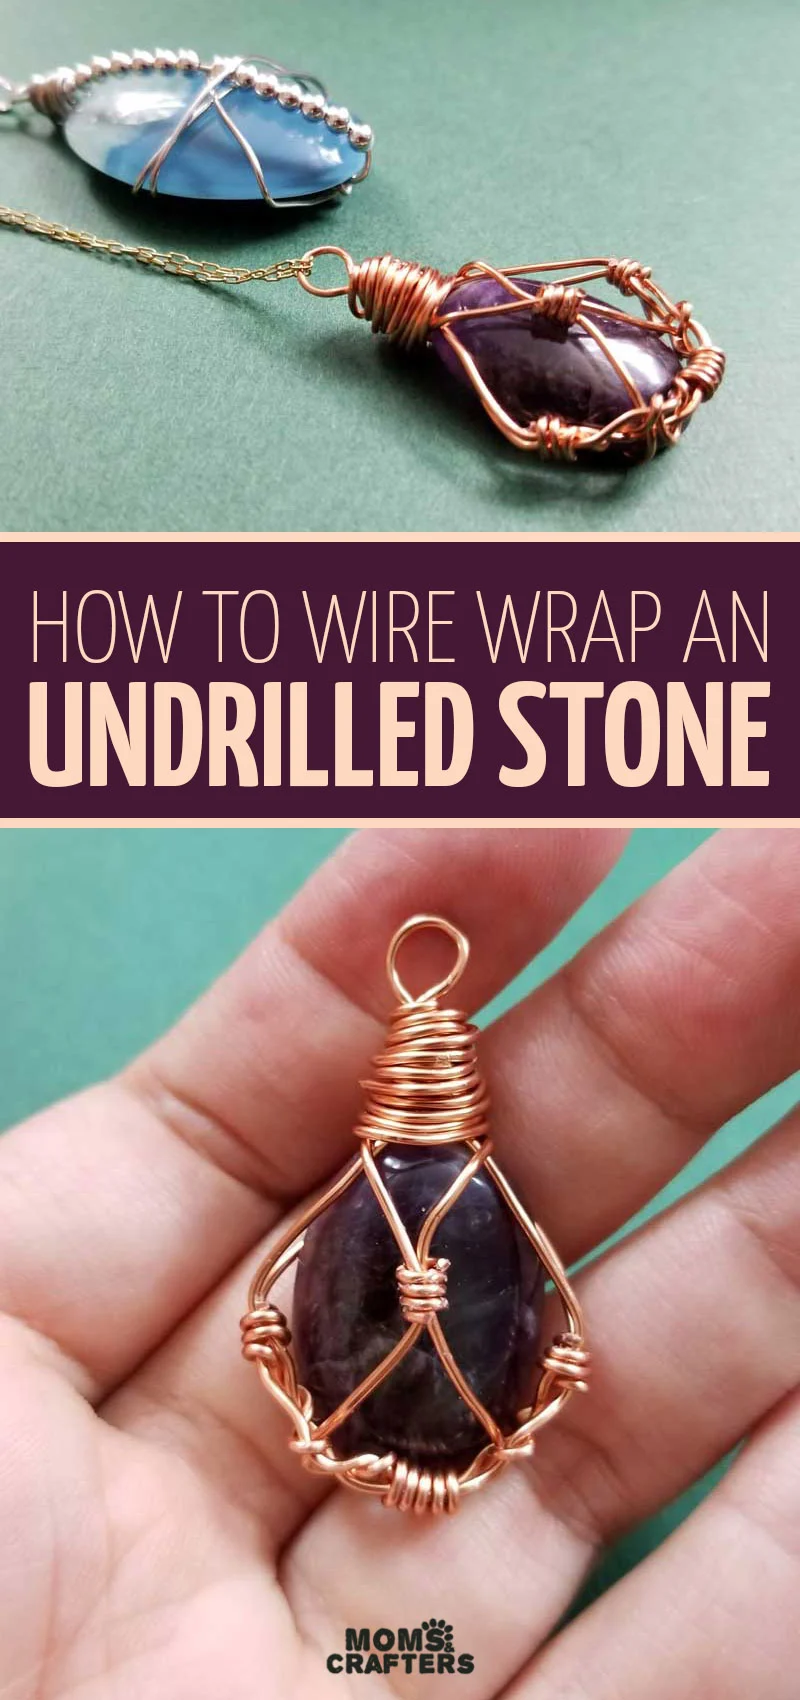 Click to learn how to wire wrap an undrilled stone with this DIY wire wrap stone pendant tutorial! It's a fun wire wrapping jewelry making tutorial for beginners and intermediates. 